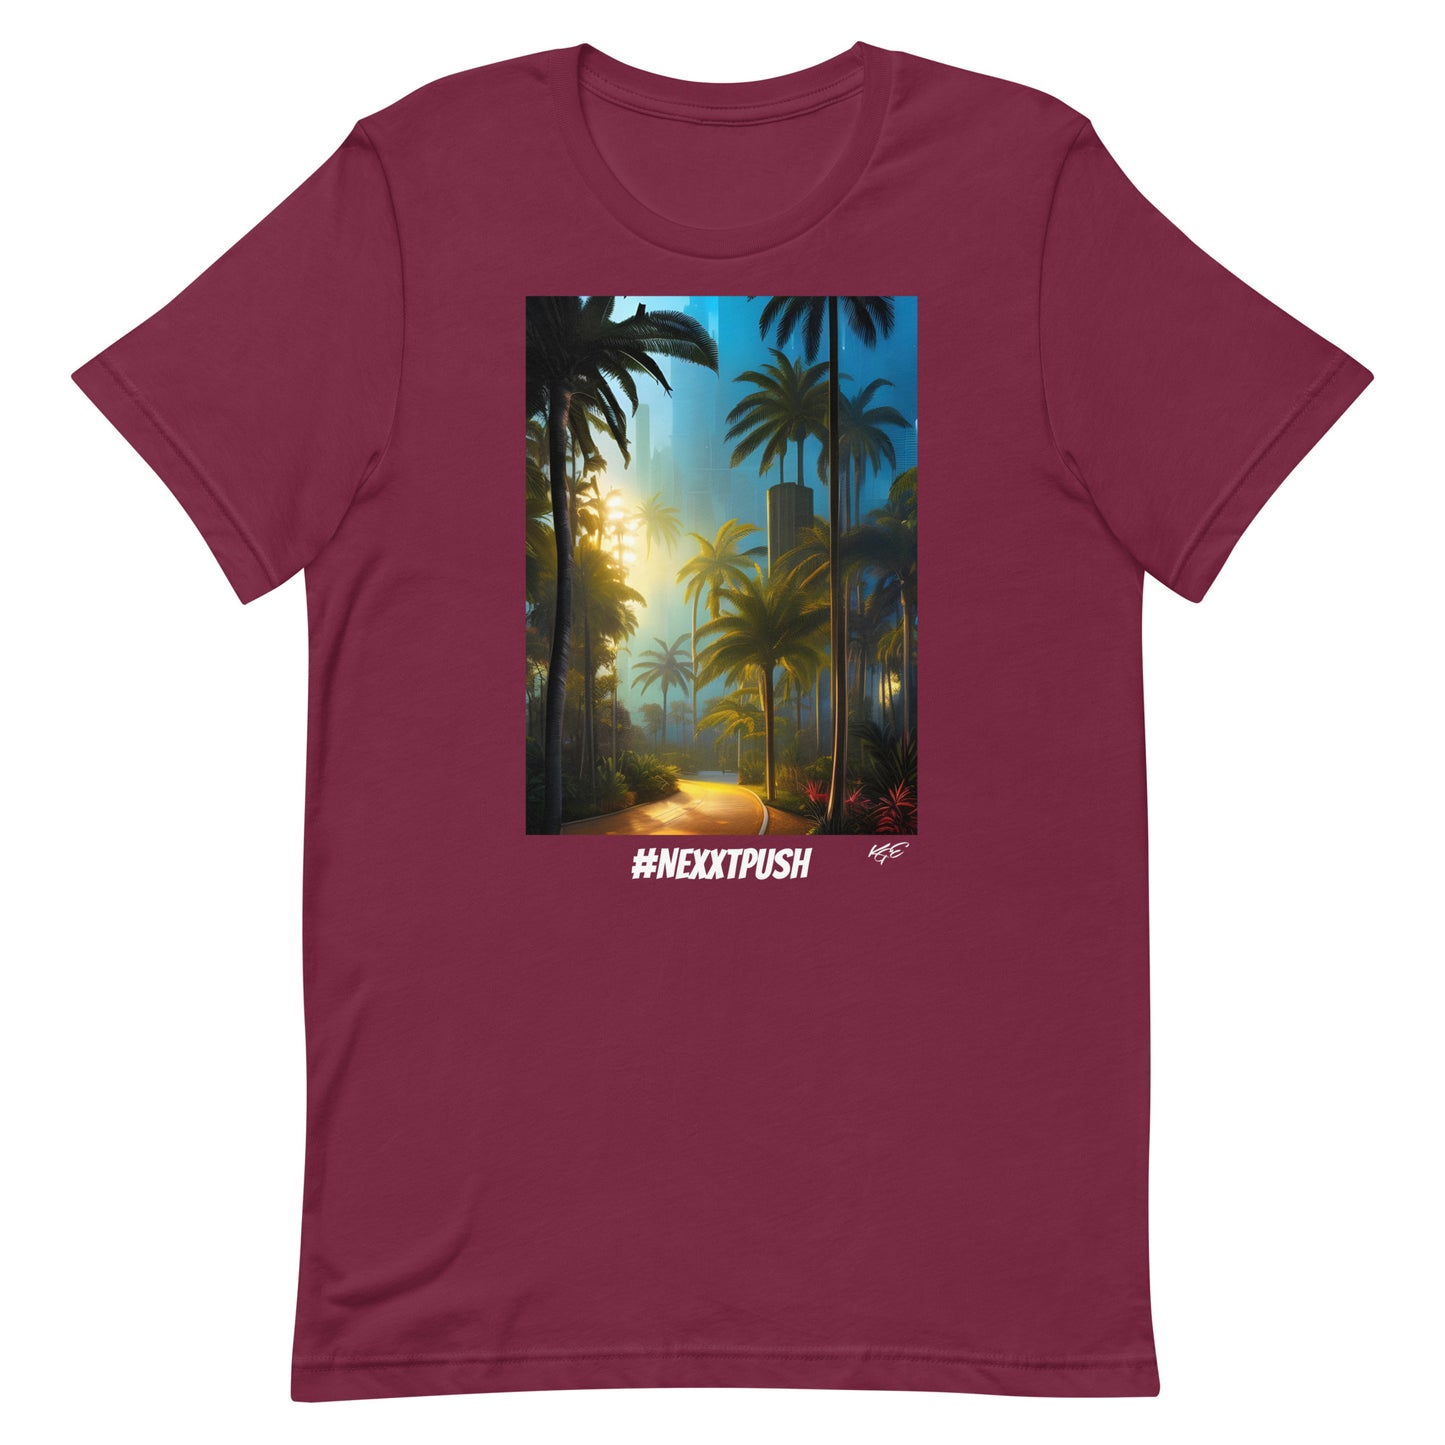 (New) #Nexxtpush The Future | Tropical | Premium Tee (Limited Collection)